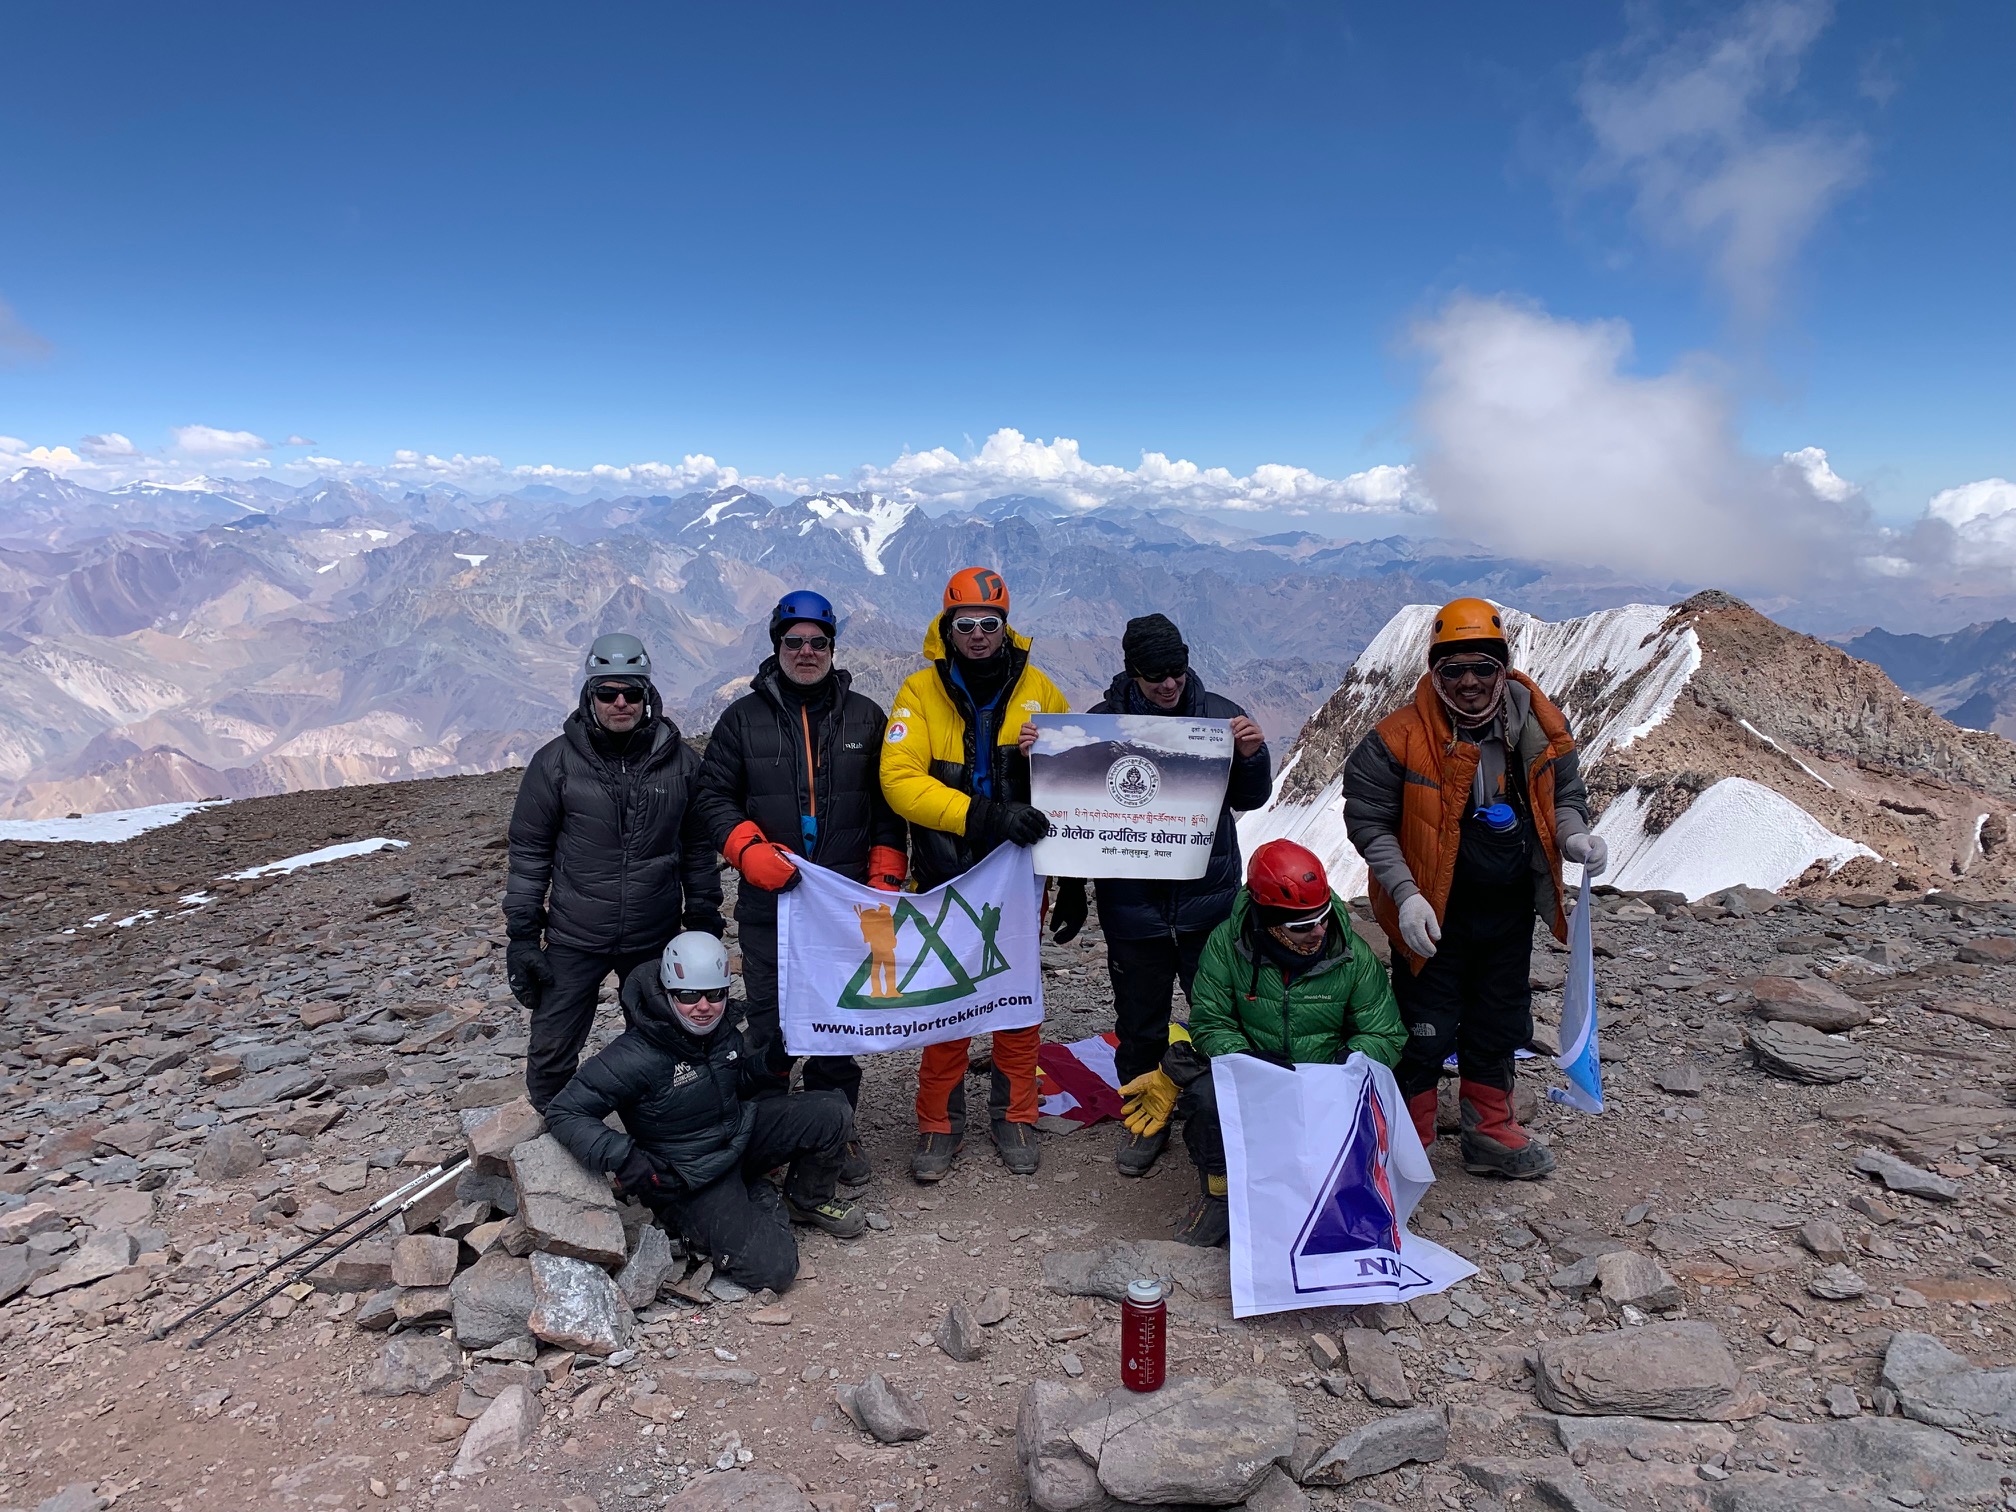 The top of Aconcagua